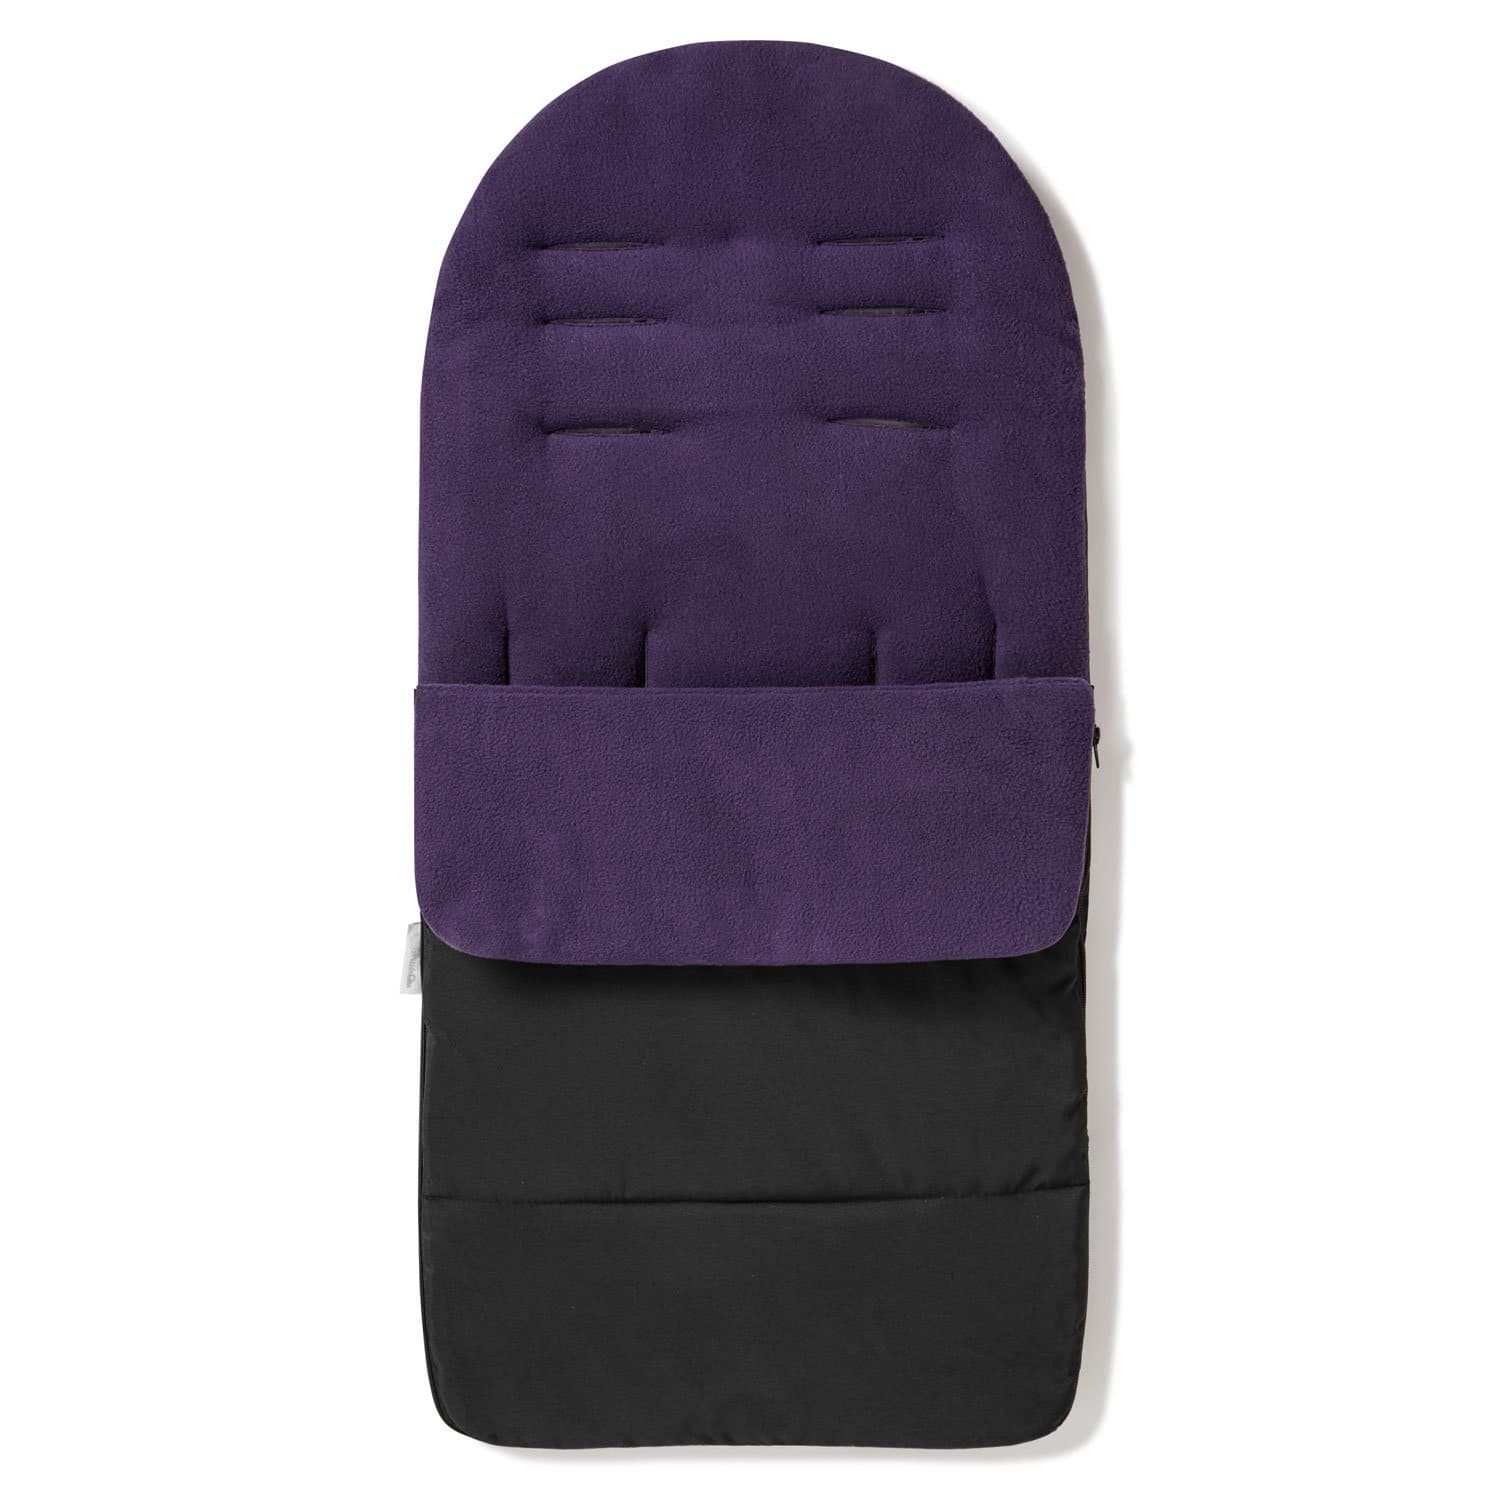 Premium Footmuff / Cosy Toes Compatible with TFK - Plum Purple / Fits All Models | For Your Little One